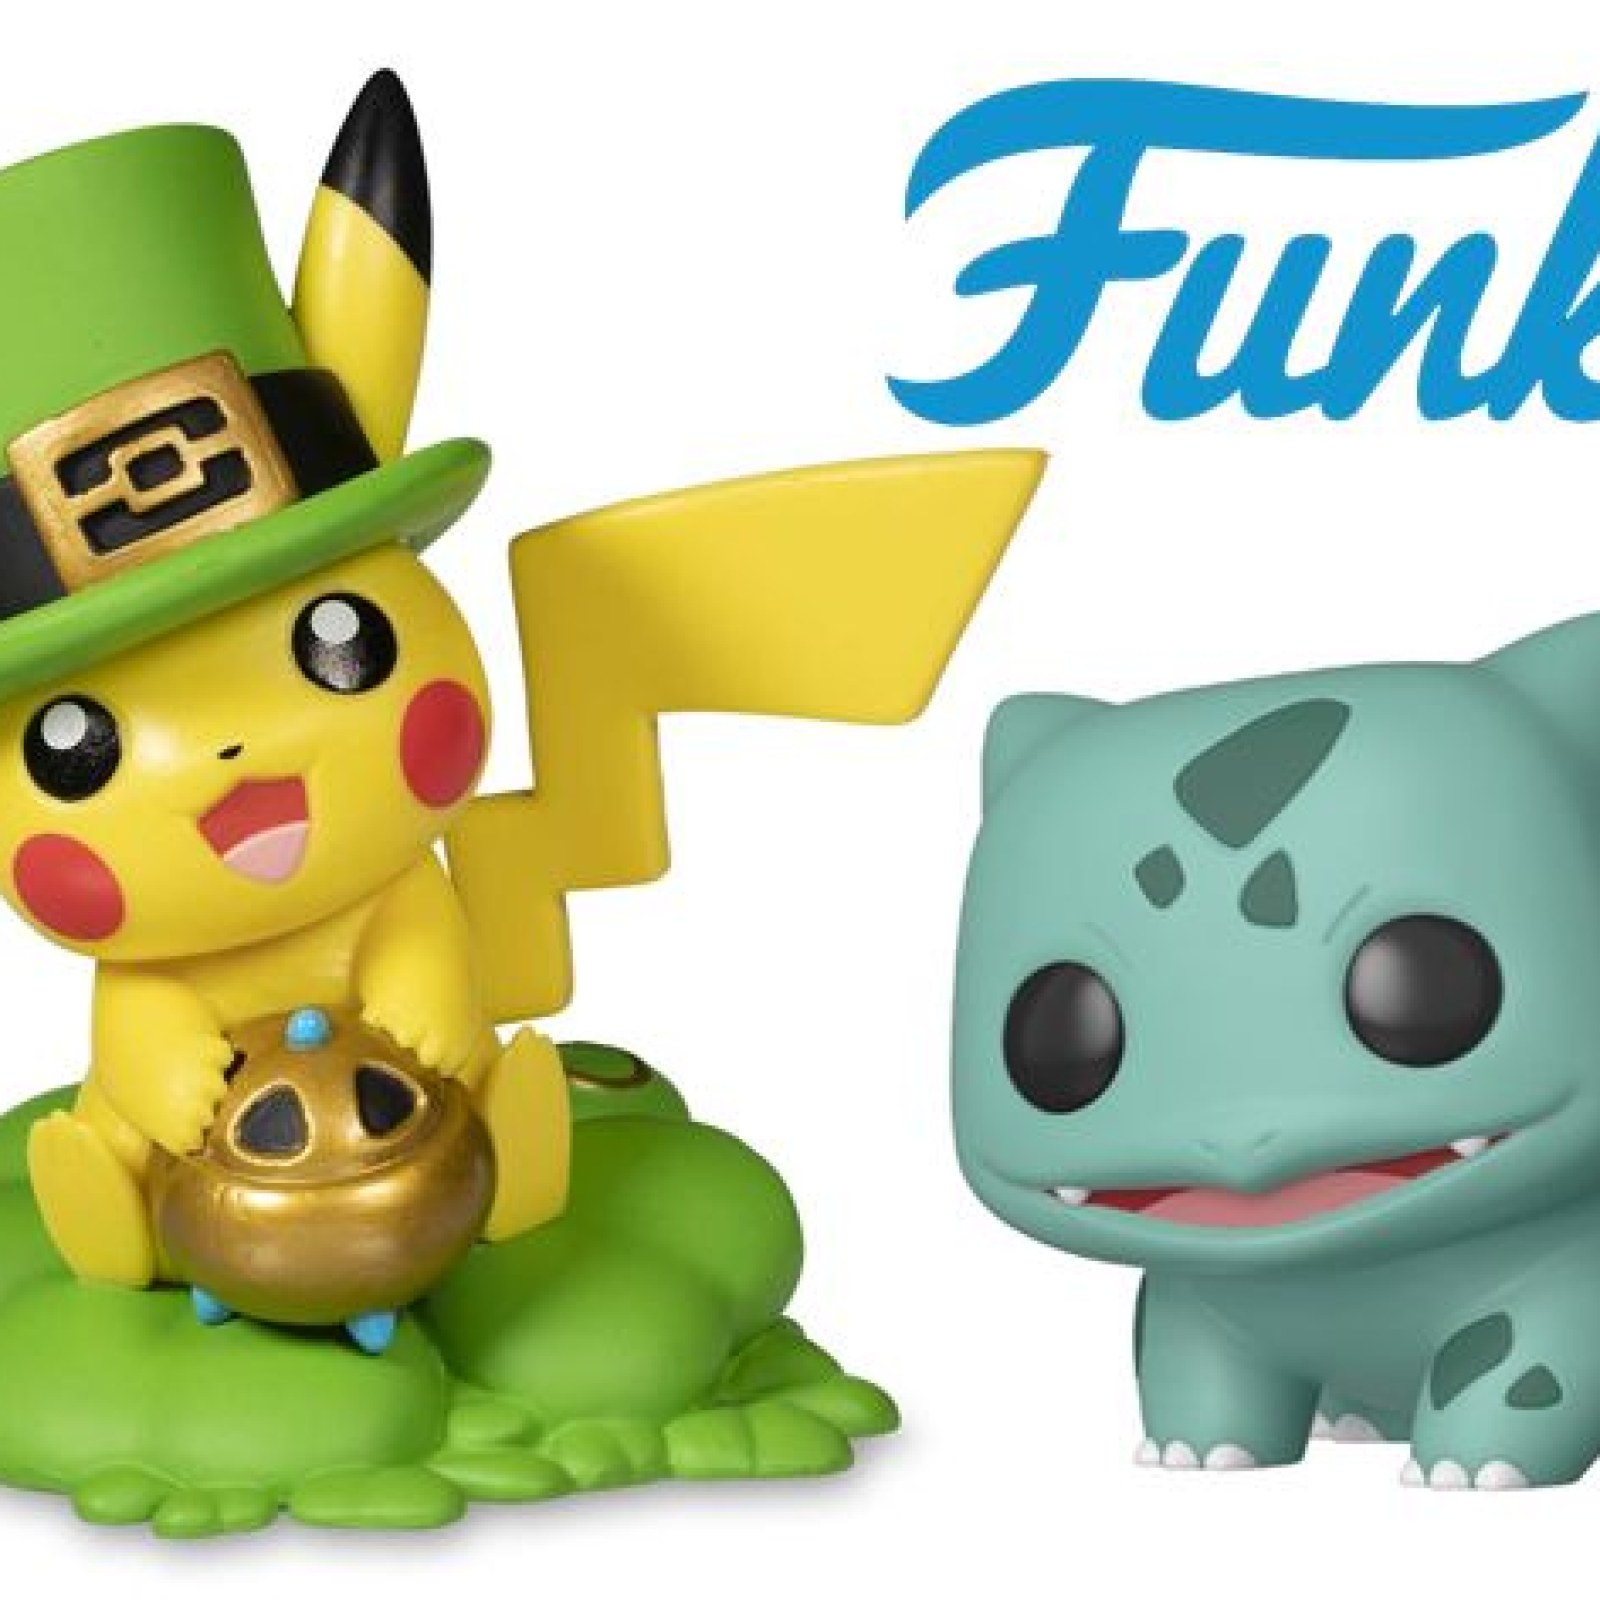 New Pokémon Funko Pops Include Bulbasaur And A Line Of